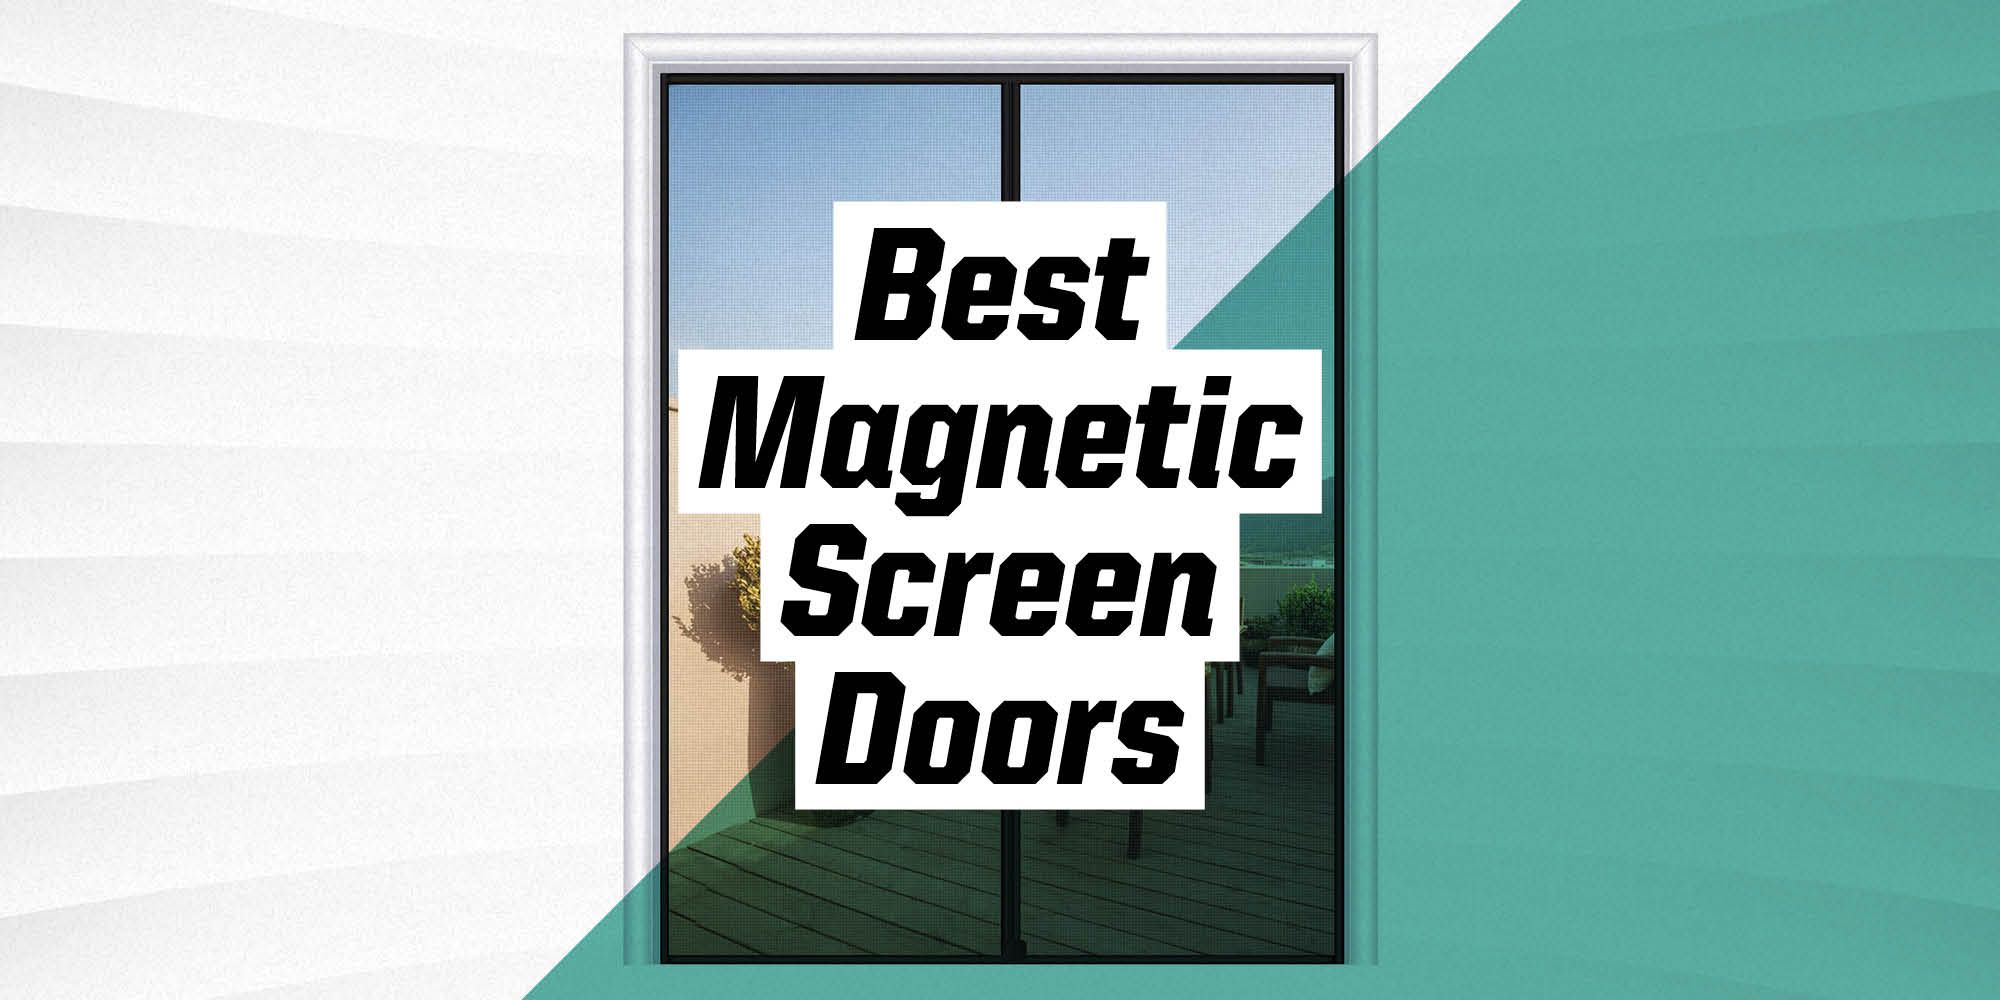 MAGZO Magnetic Screen Door Fit Door Size 72 x 80 Inch, Actual Screen Size  74 x 81 French Door Screen Mesh with Full Frame Hook&Loop, Durable  Polyester, White 